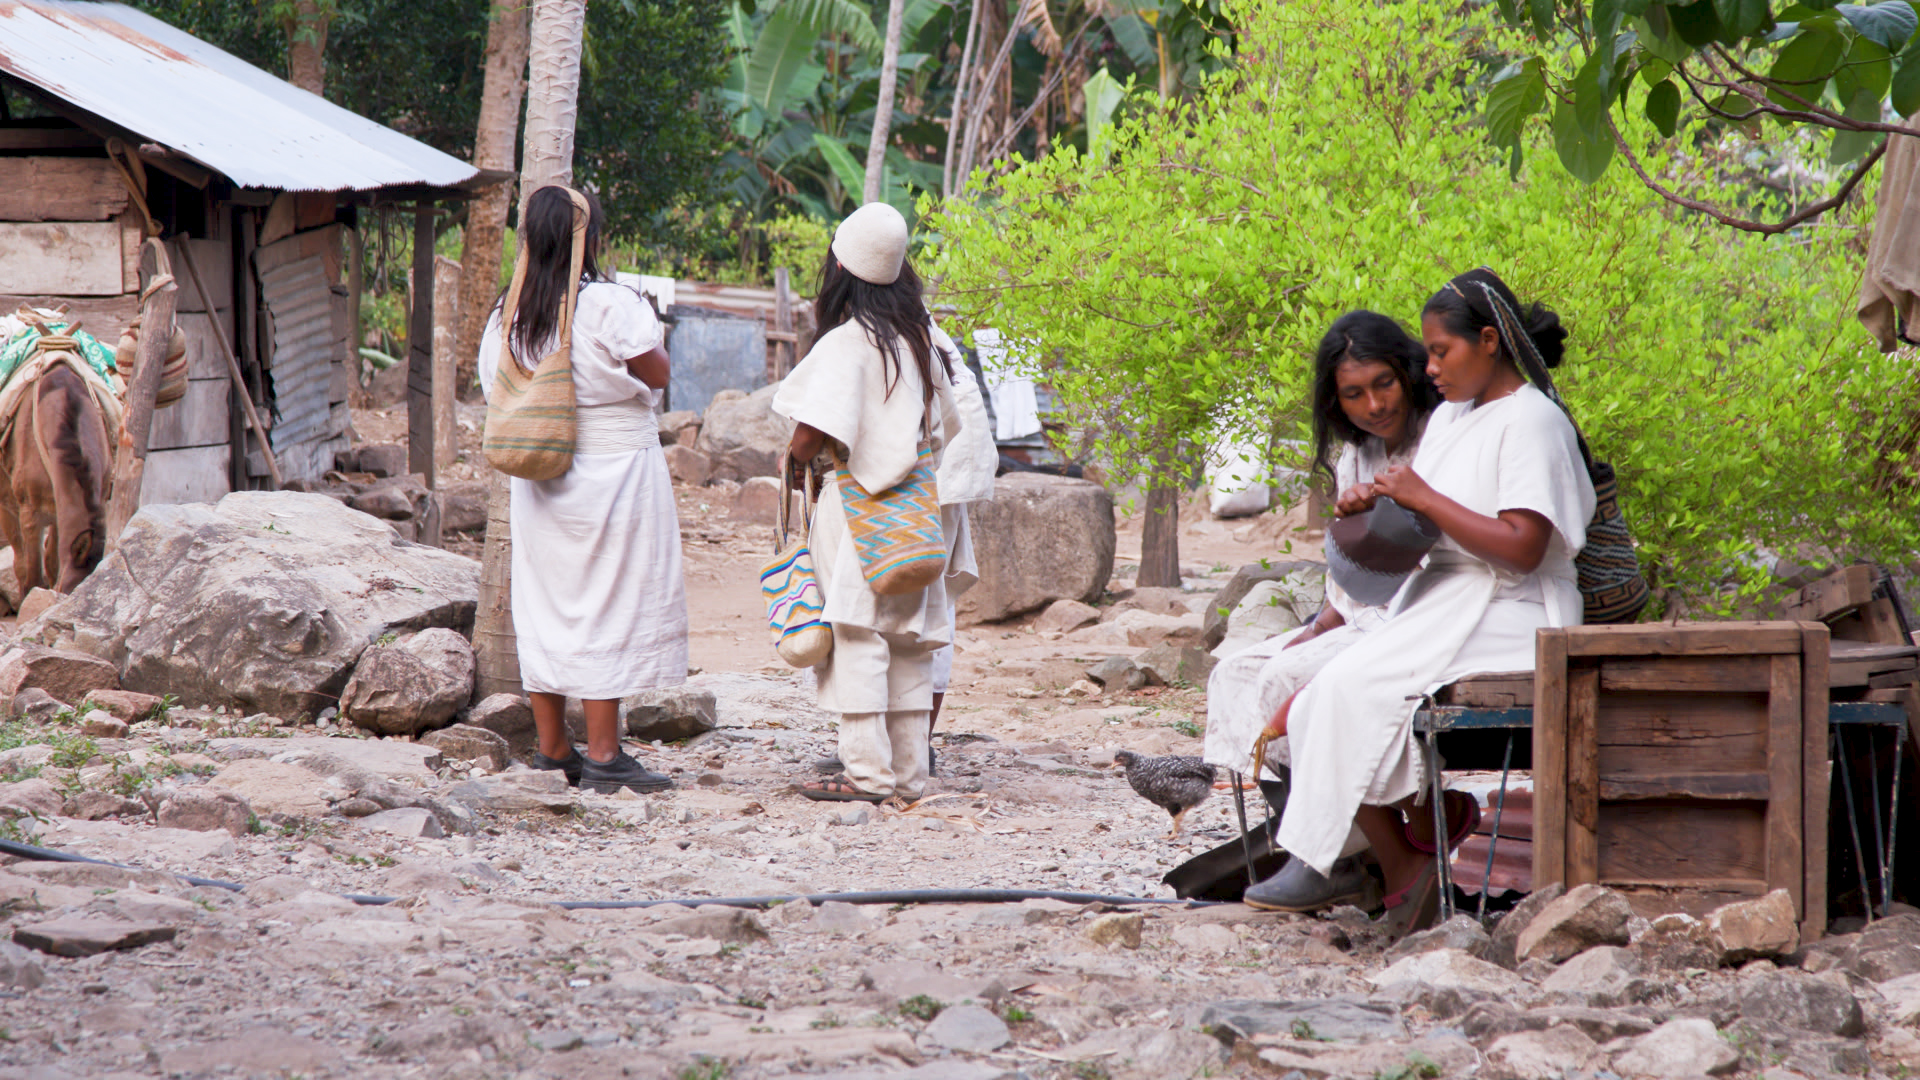 Explore the Homelands of the Arhuaco and the Wayúu people of northern Columbia